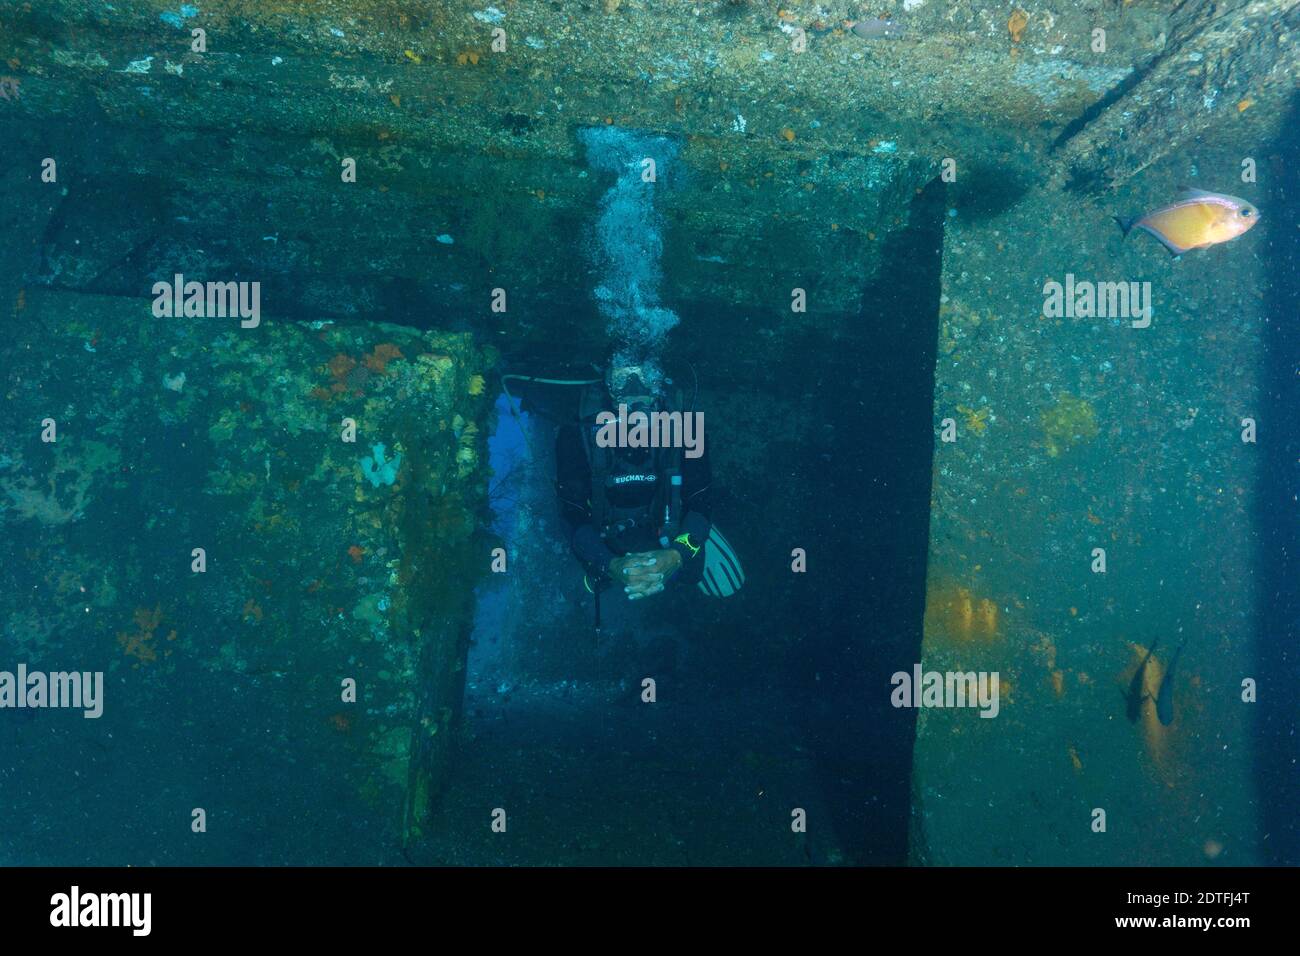 A Scuba Diver exploring the inside chambers of a Shipwreck in Bali (Kubu Wreck off Amed, Bali) Stock Photo